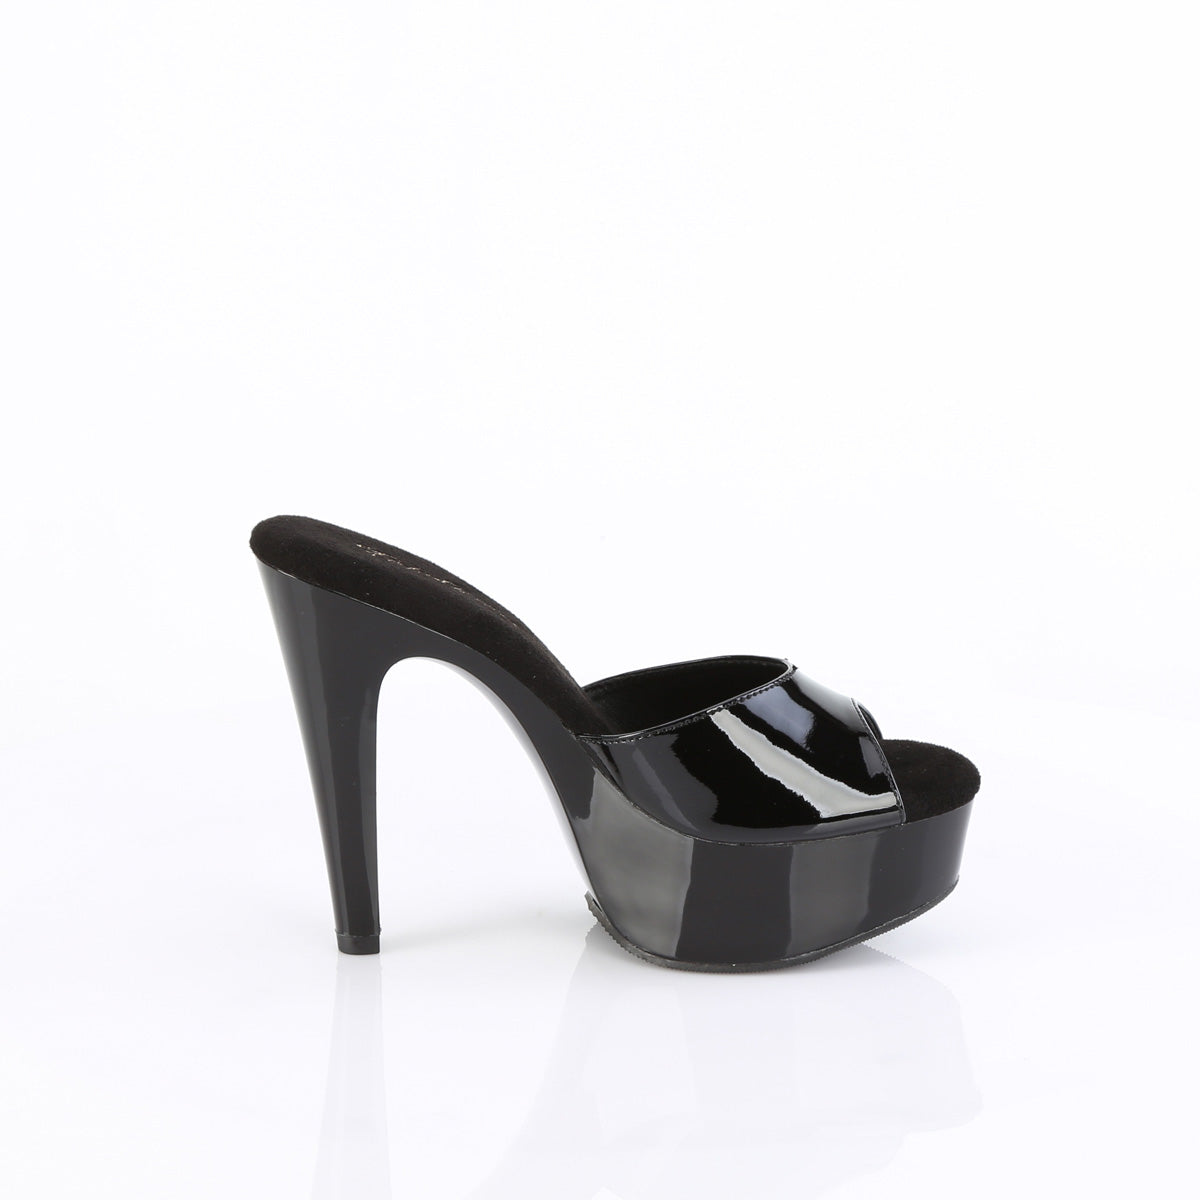 MARTINI-501 Fabulicious Black Patent Shoes [Sexy Shoes]